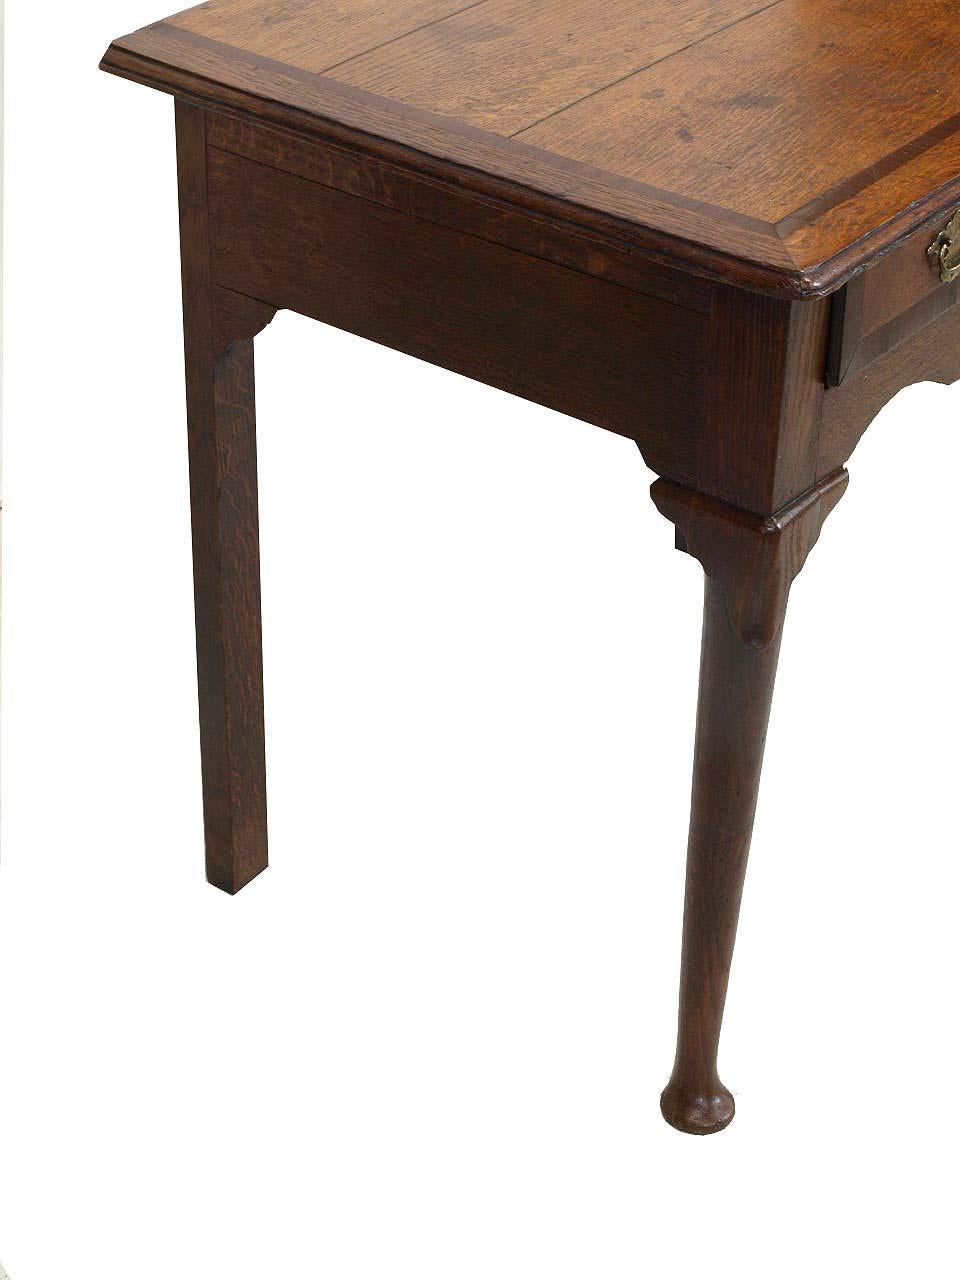 English Queen Anne oak lowboy, the top has''breadboard'' ends around the front perimeter followed by a band of mahogany. Note in the photos of the top, there are two minor shrinkage separations running parallel to each other which is quite common